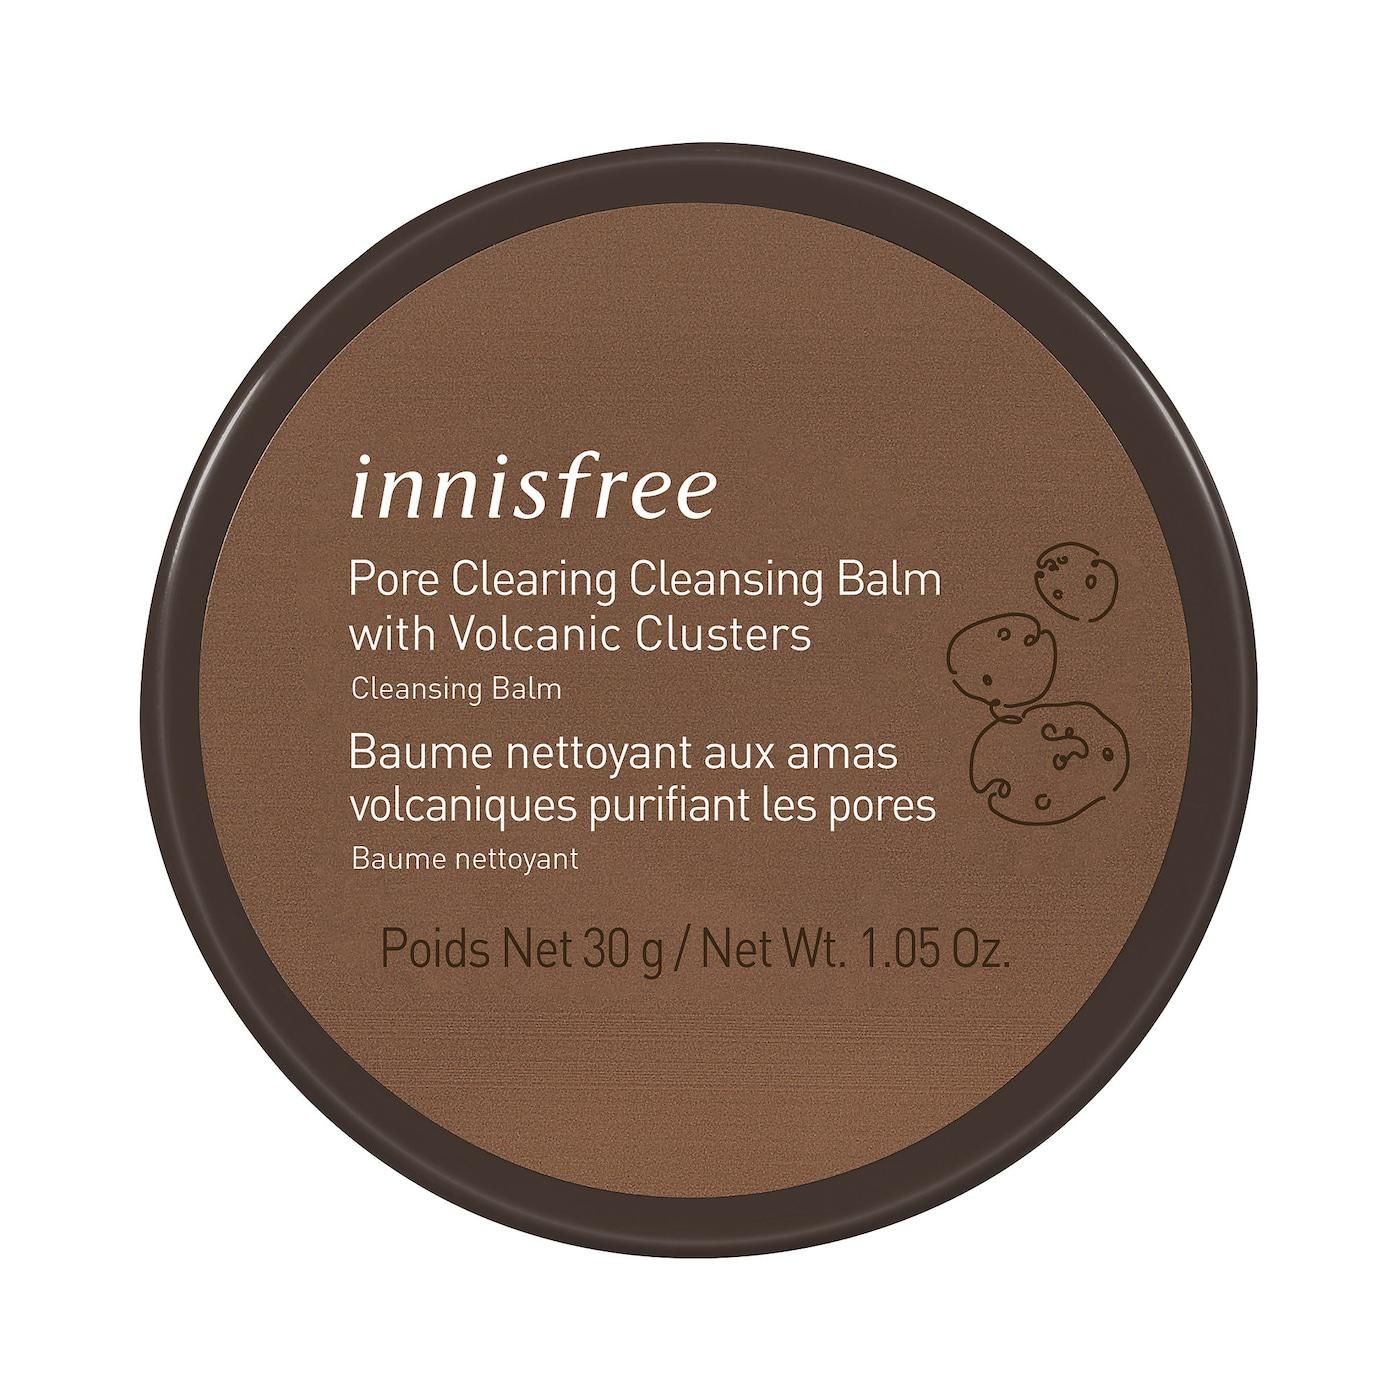 innisfree pore clearing volcanic cleansing balm